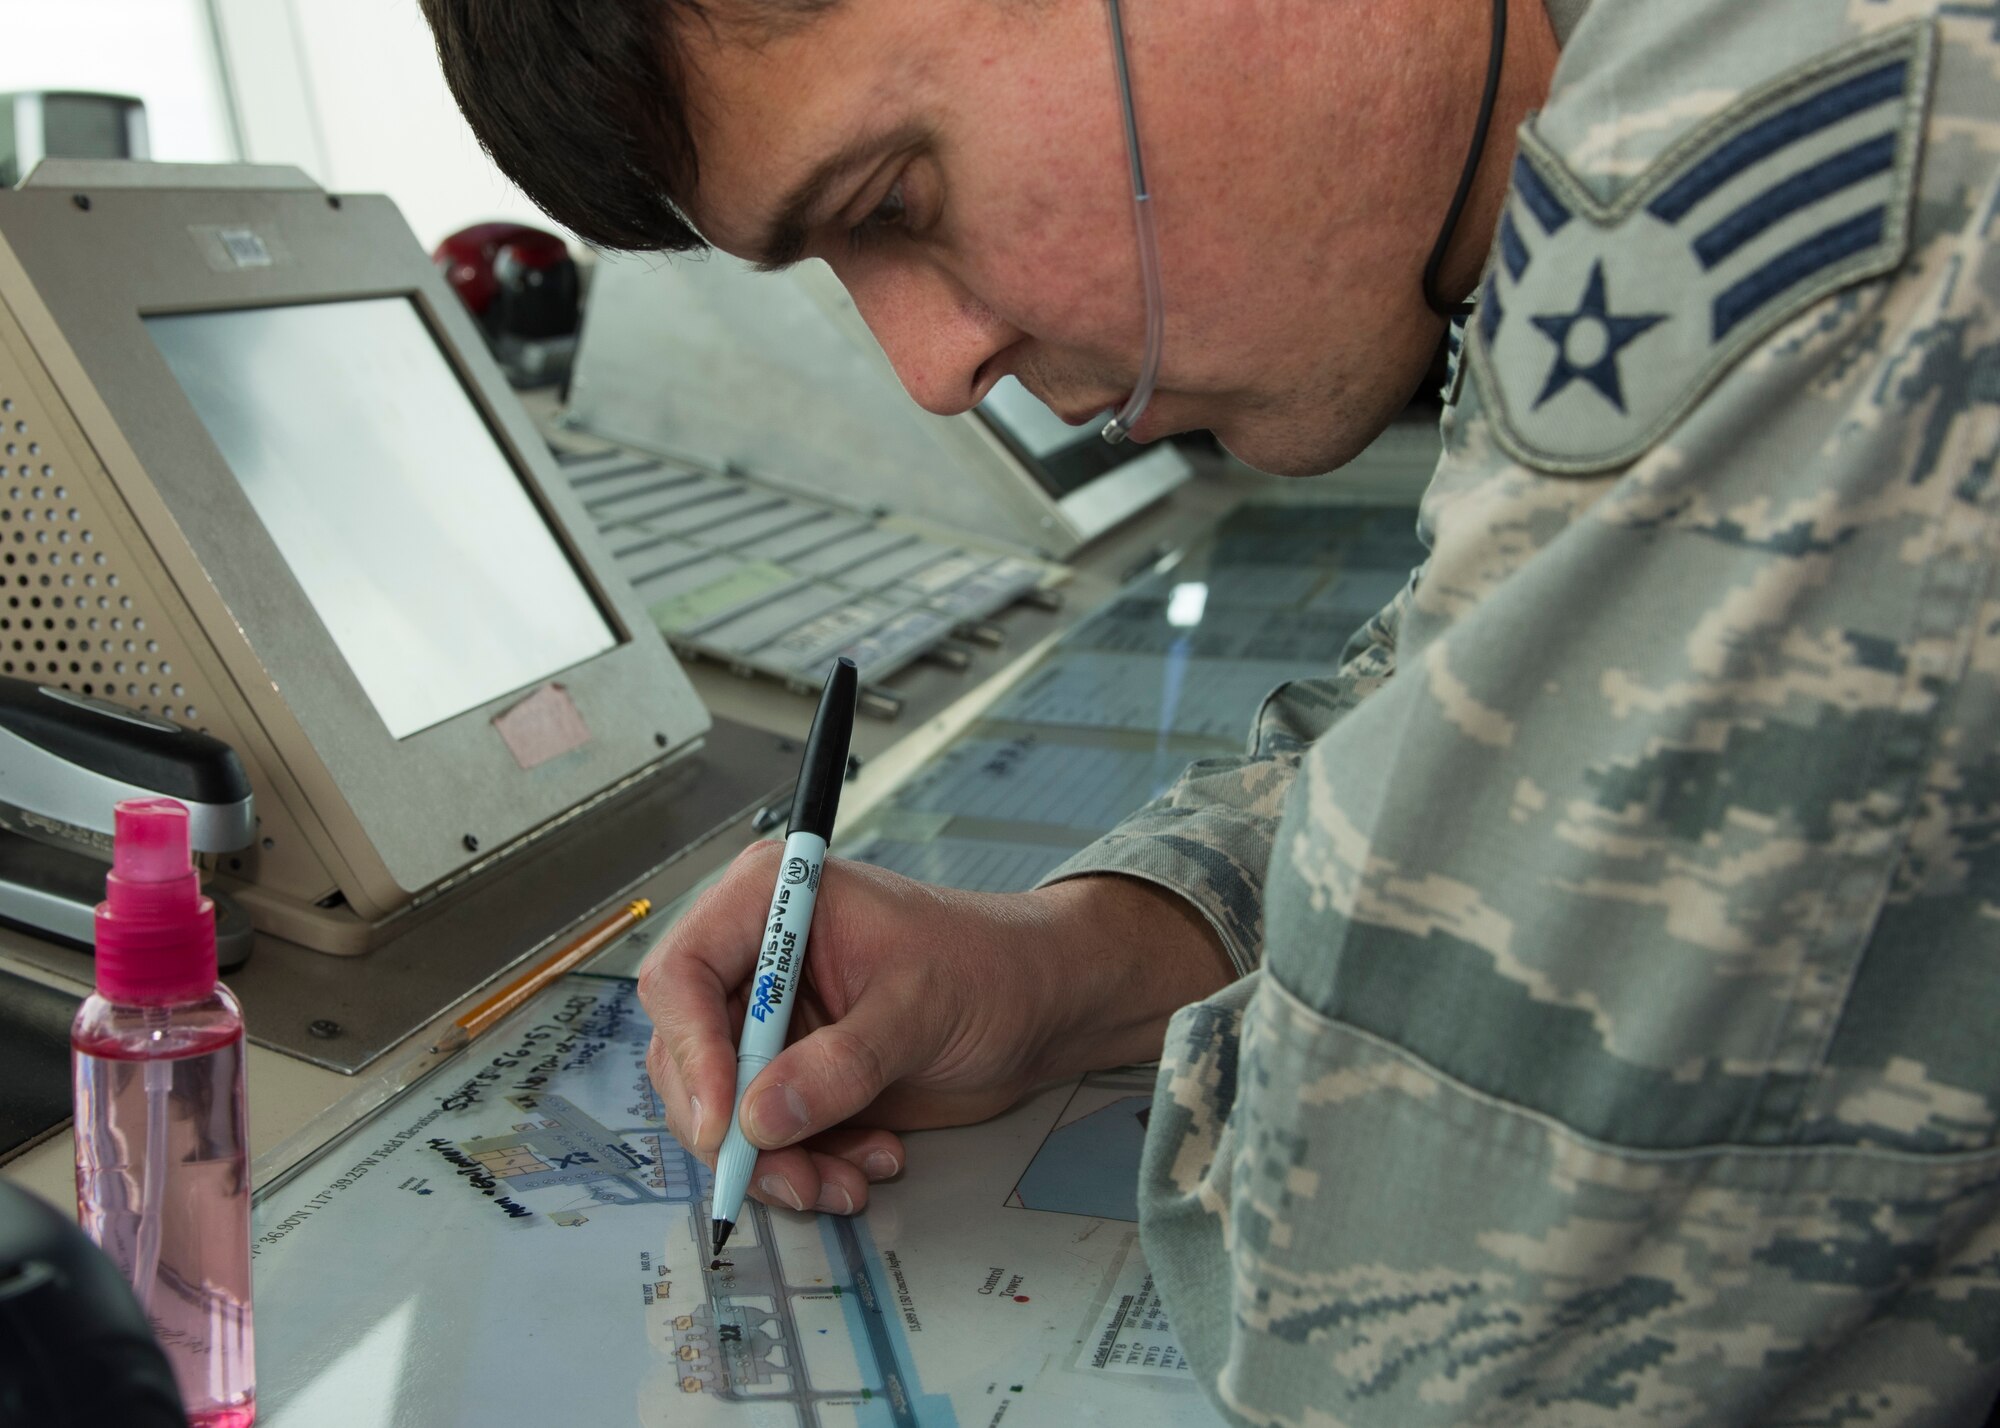 Senior Airman Adan Esqueda, 92nd Operations Support Squadron air traffic controller, marks aircraft parking spots during Exercise Global Thunder 2018 at Fairchild Air Force Base, Washington, Nov. 1, 2017. Global Thunder is an annual U.S. Strategic Command (USSTRATCOM) exercise designed to provide training opportunities to test and validate command, control and operational procedures. The training is based on a notional scenario developed to drive execution of USSTRATCOM and component forces’ ability to support the geographic combatant commands, deter adversaries and, if necessary, employ forces as directed by the President of the United States. (U.S. Air Force photo/Senior Airman Ryan Lackey)